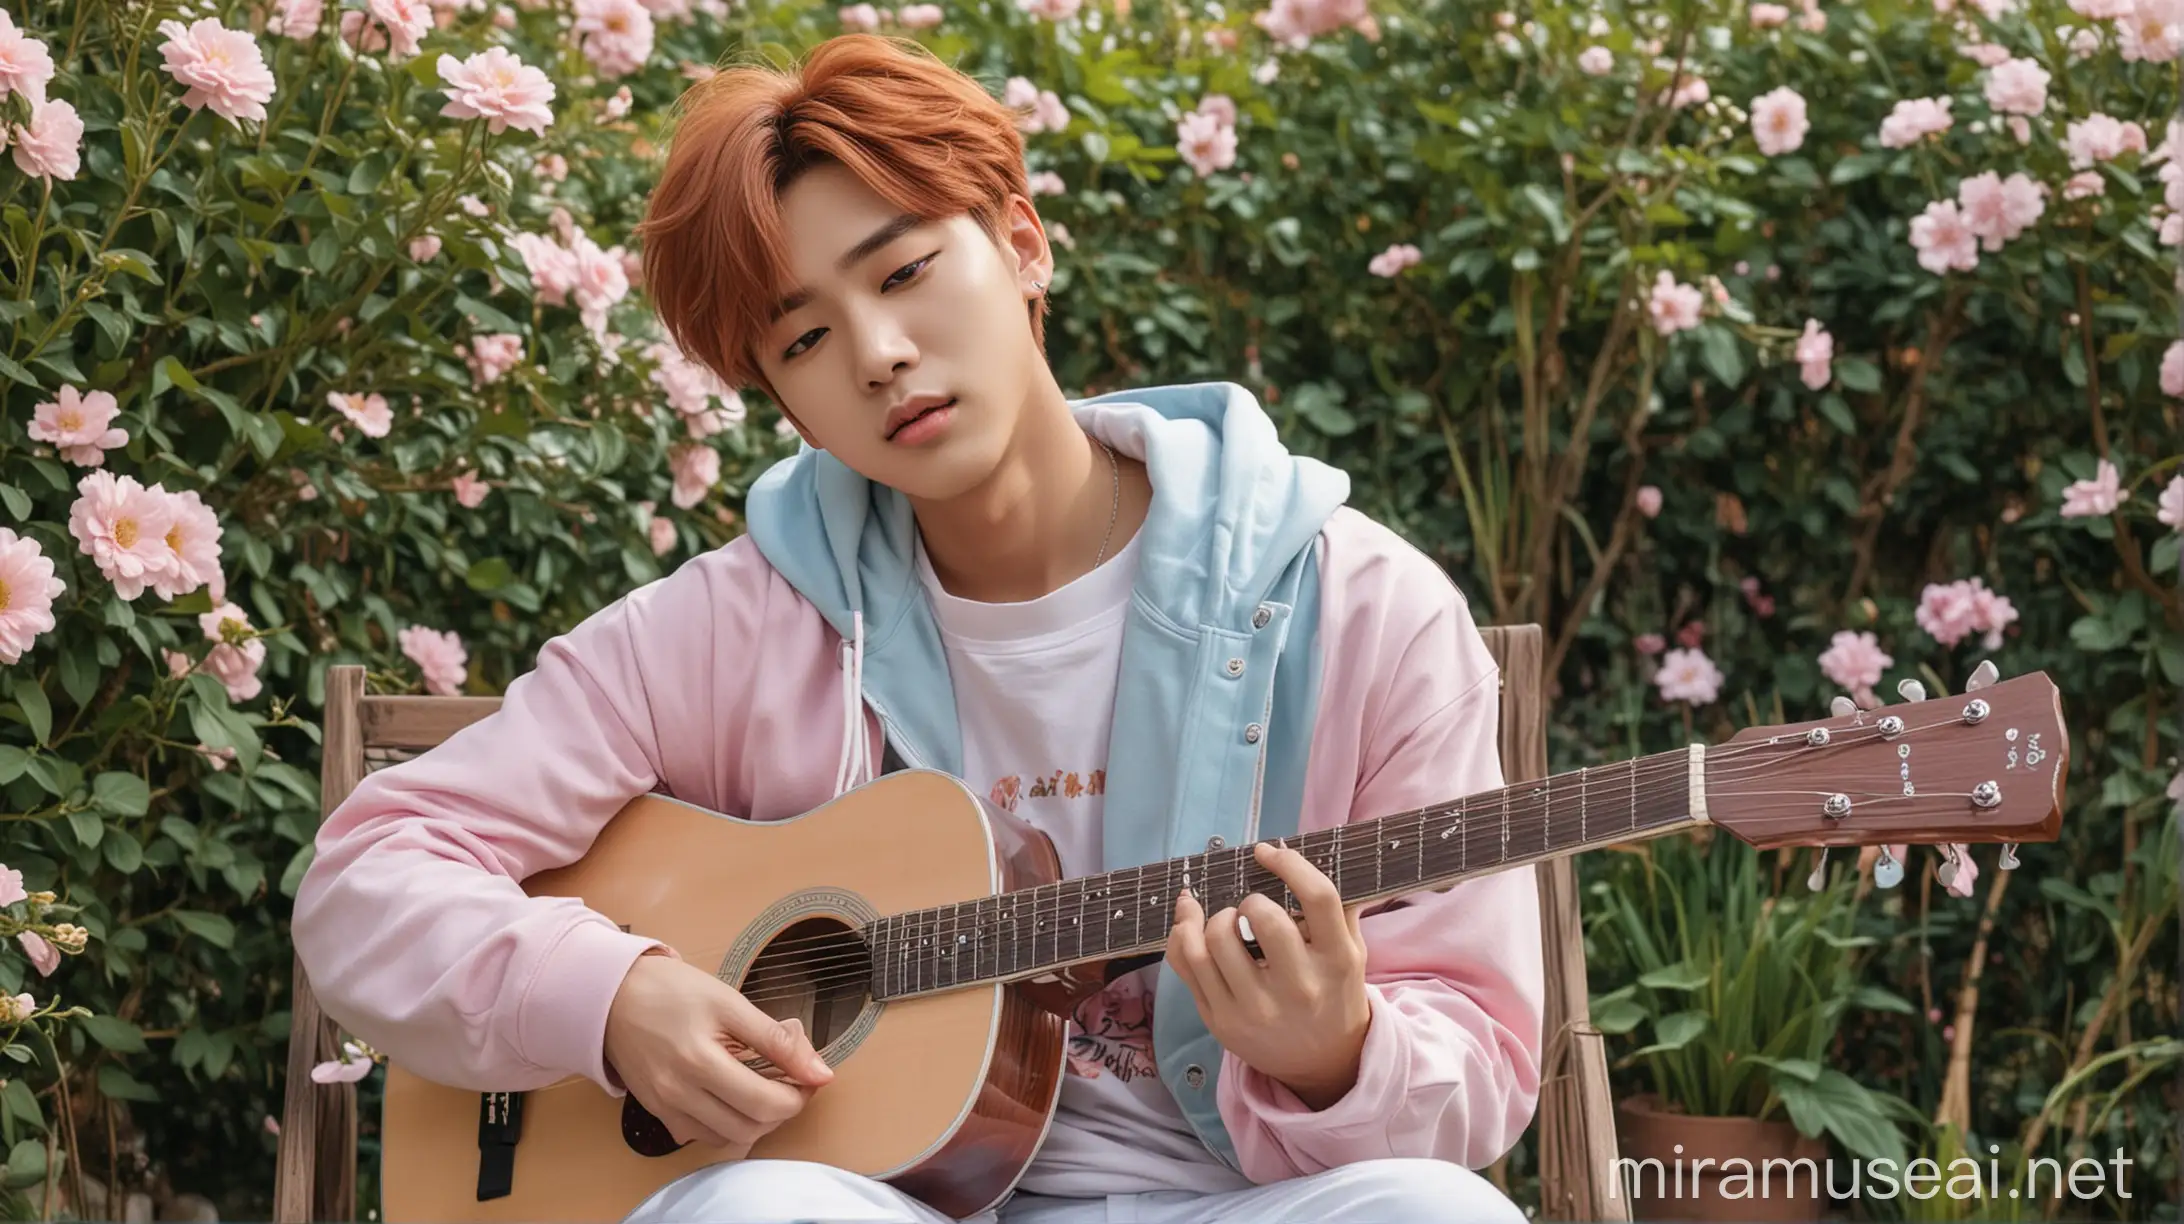 Stylish Kpop Male Idol Singing and Playing Guitar in Aesthetic Flower Garden